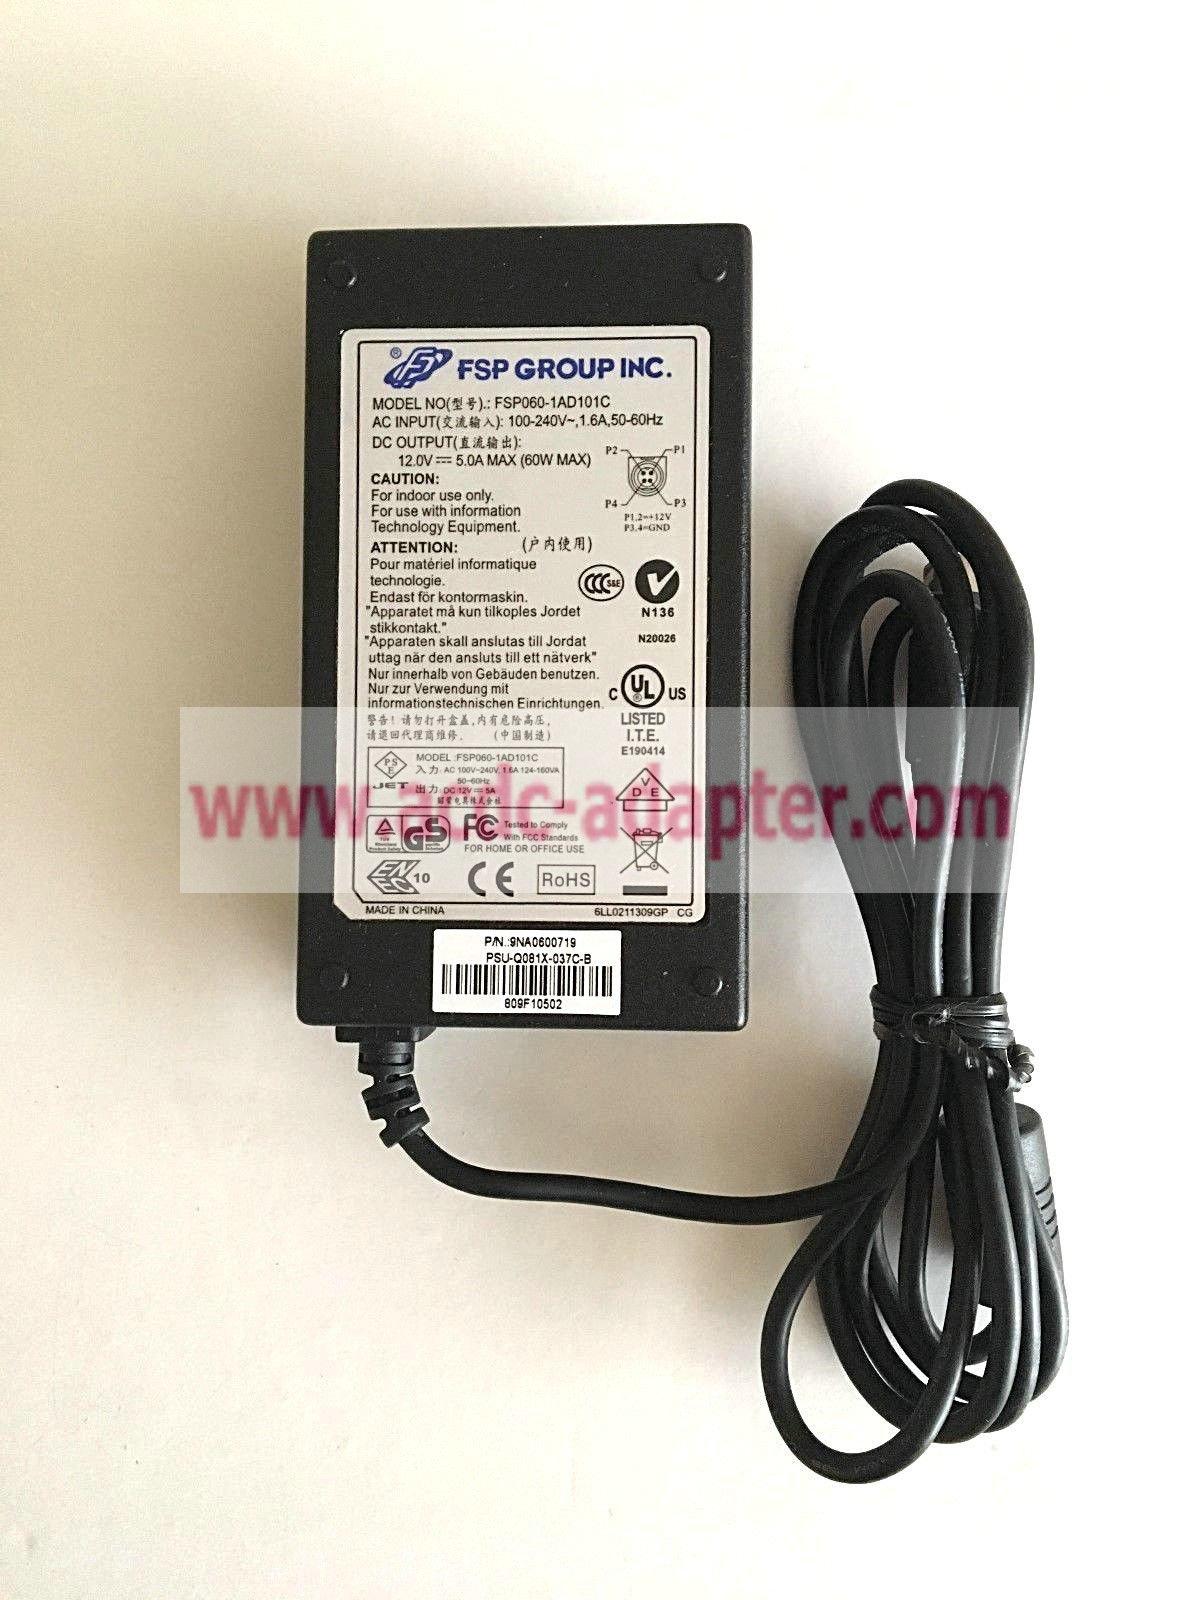 Genuine FSP Group FSP060-1AD101C 12V 5A AC Power Adapter Charger 4 pin